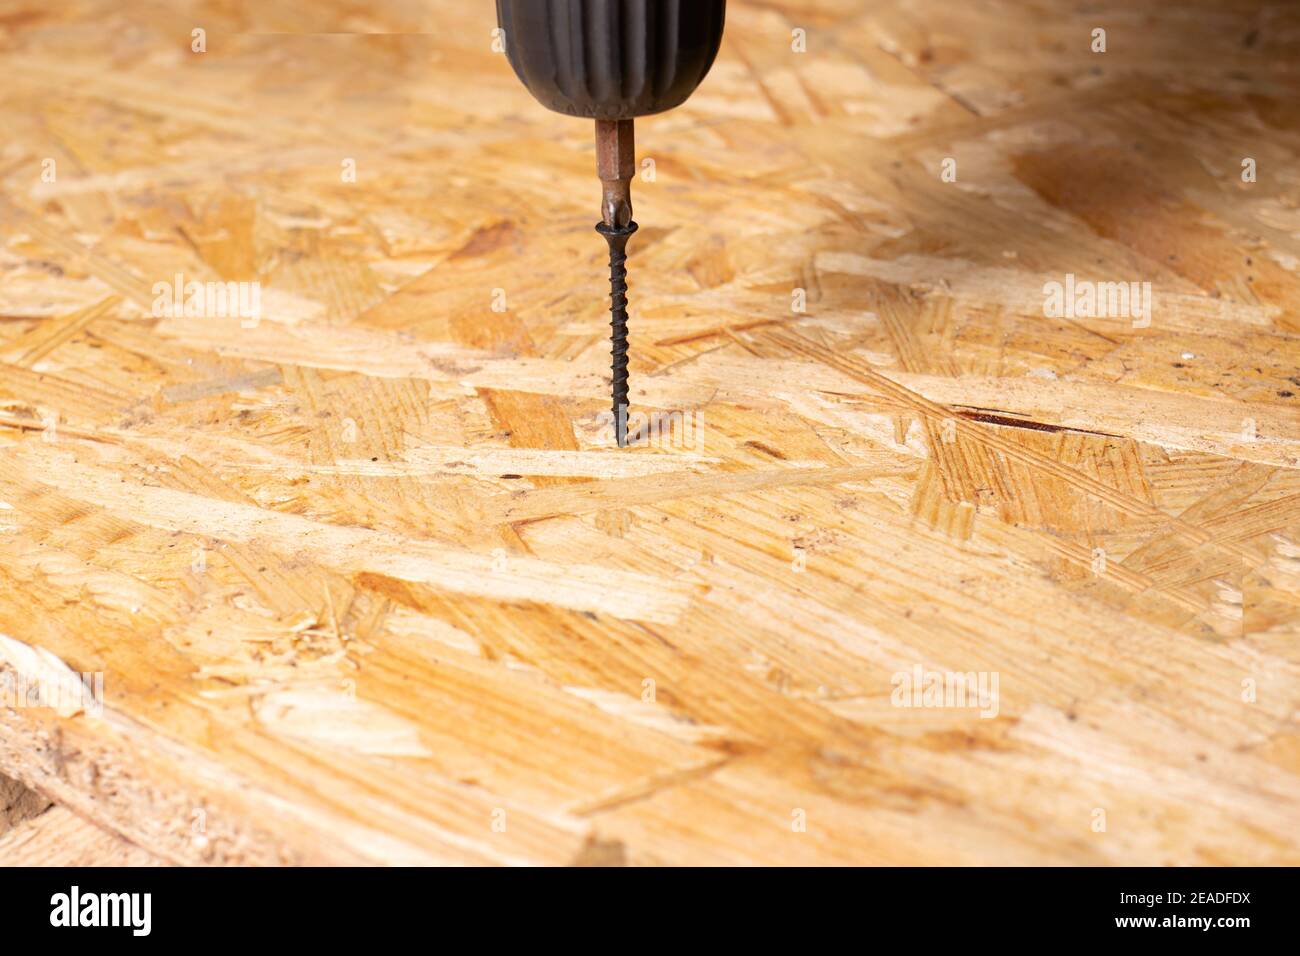 Screw and screwdriver on a chipboard sheet. Carpentry and construction tools with copyspace for text. Stock Photo